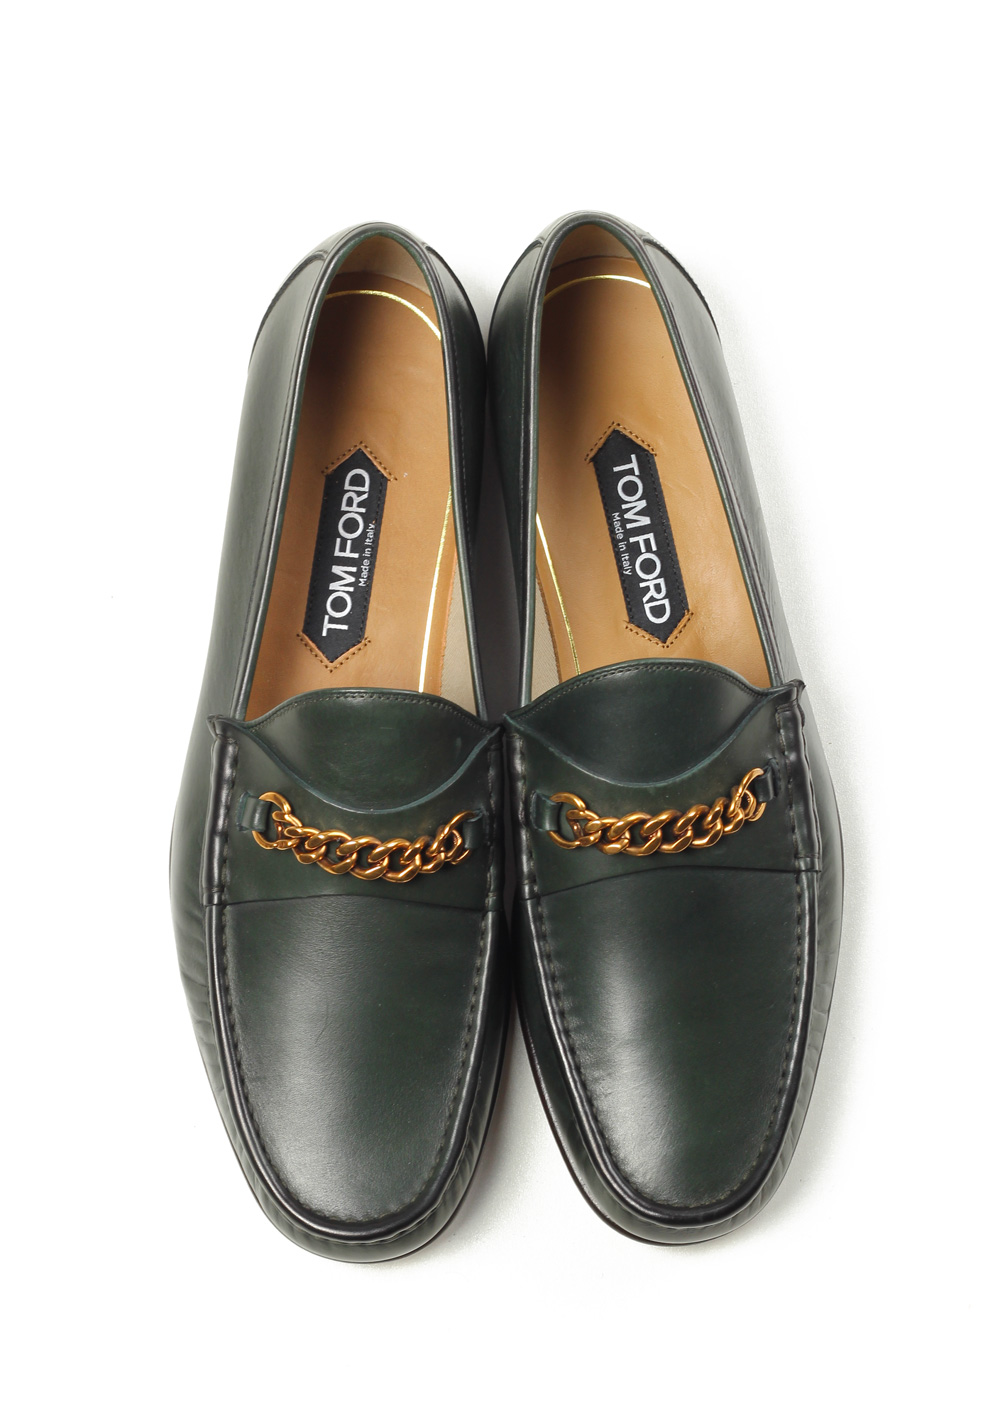 TOM FORD York Green Leather Chain Loafers Shoes Size 10,5 UK / 11,5 . |